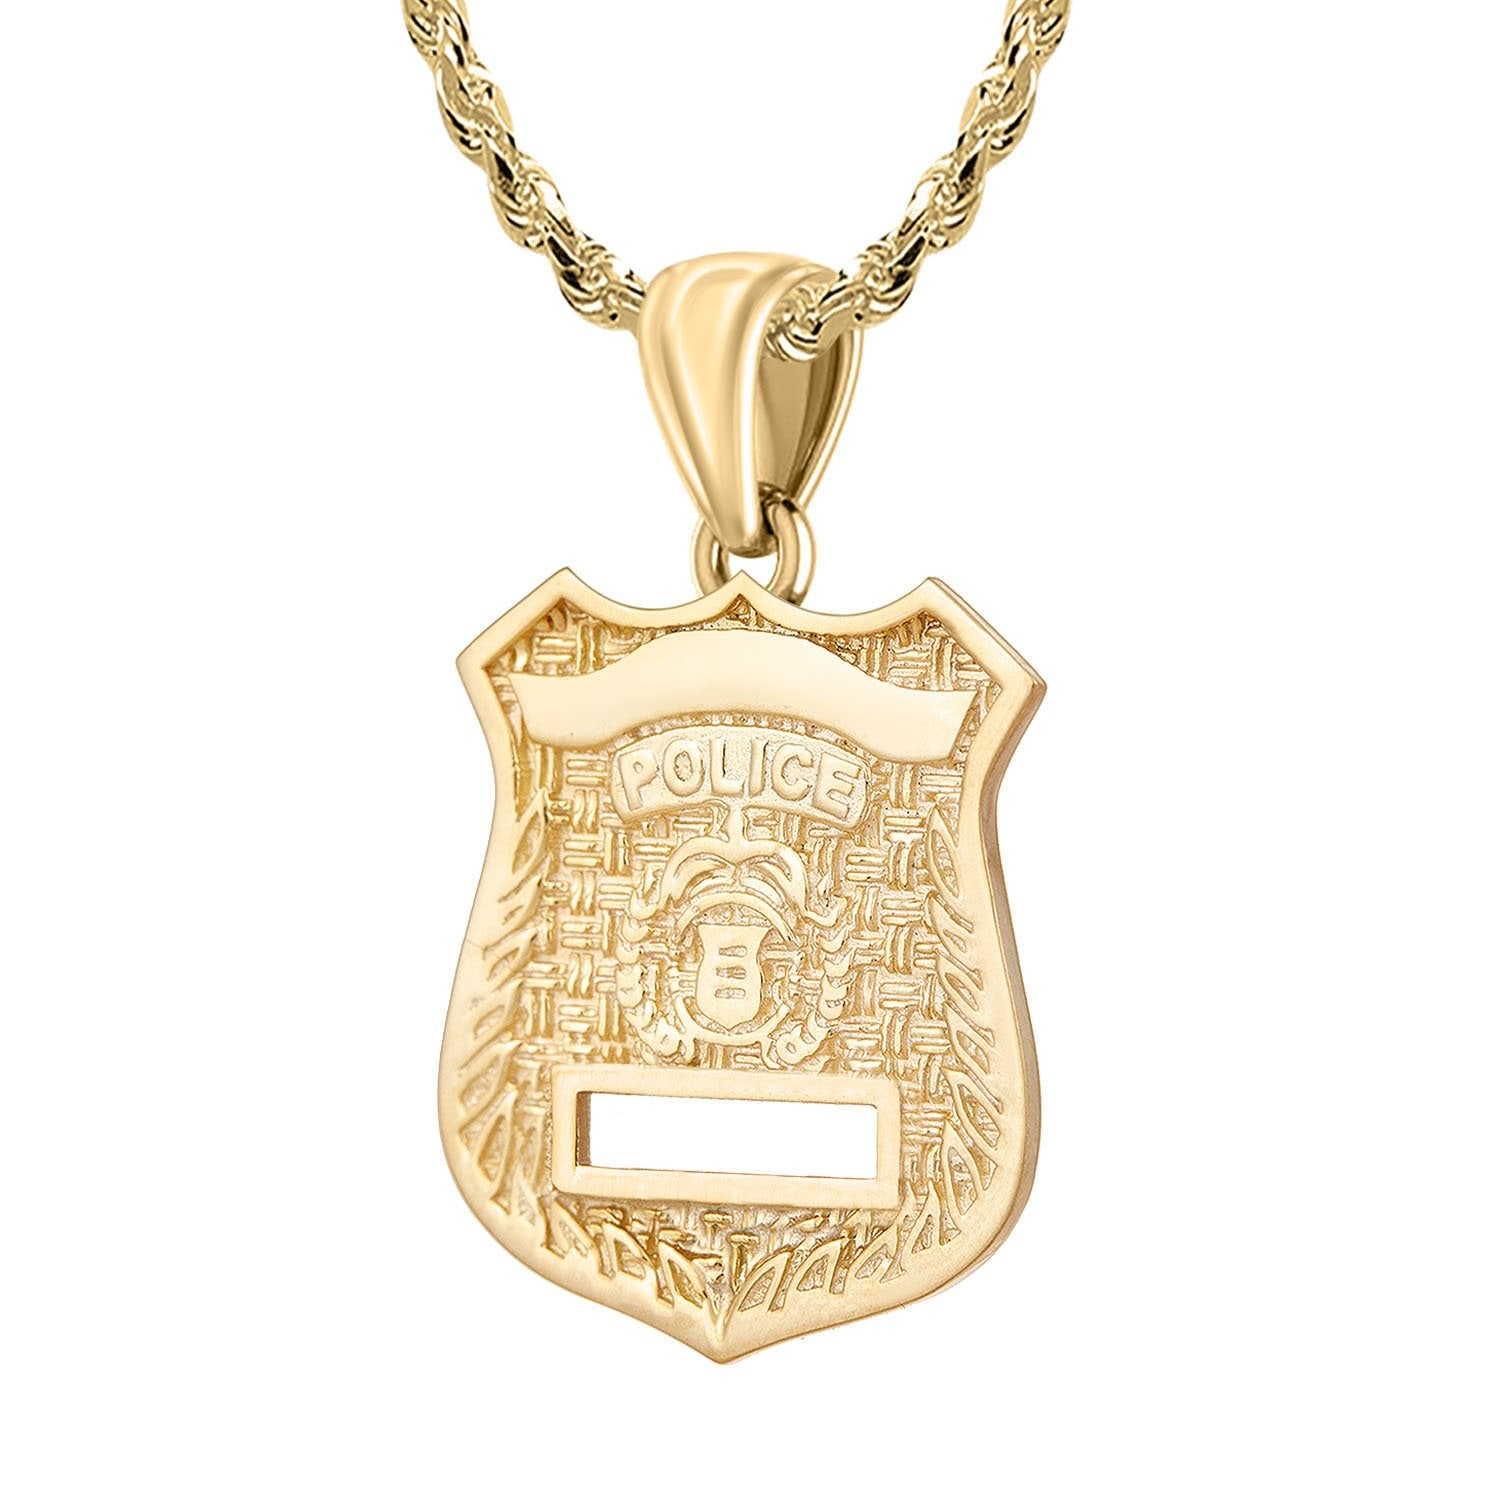 Police Badge Necklace In Gold of 26mm - 2.5mm Rope Chain